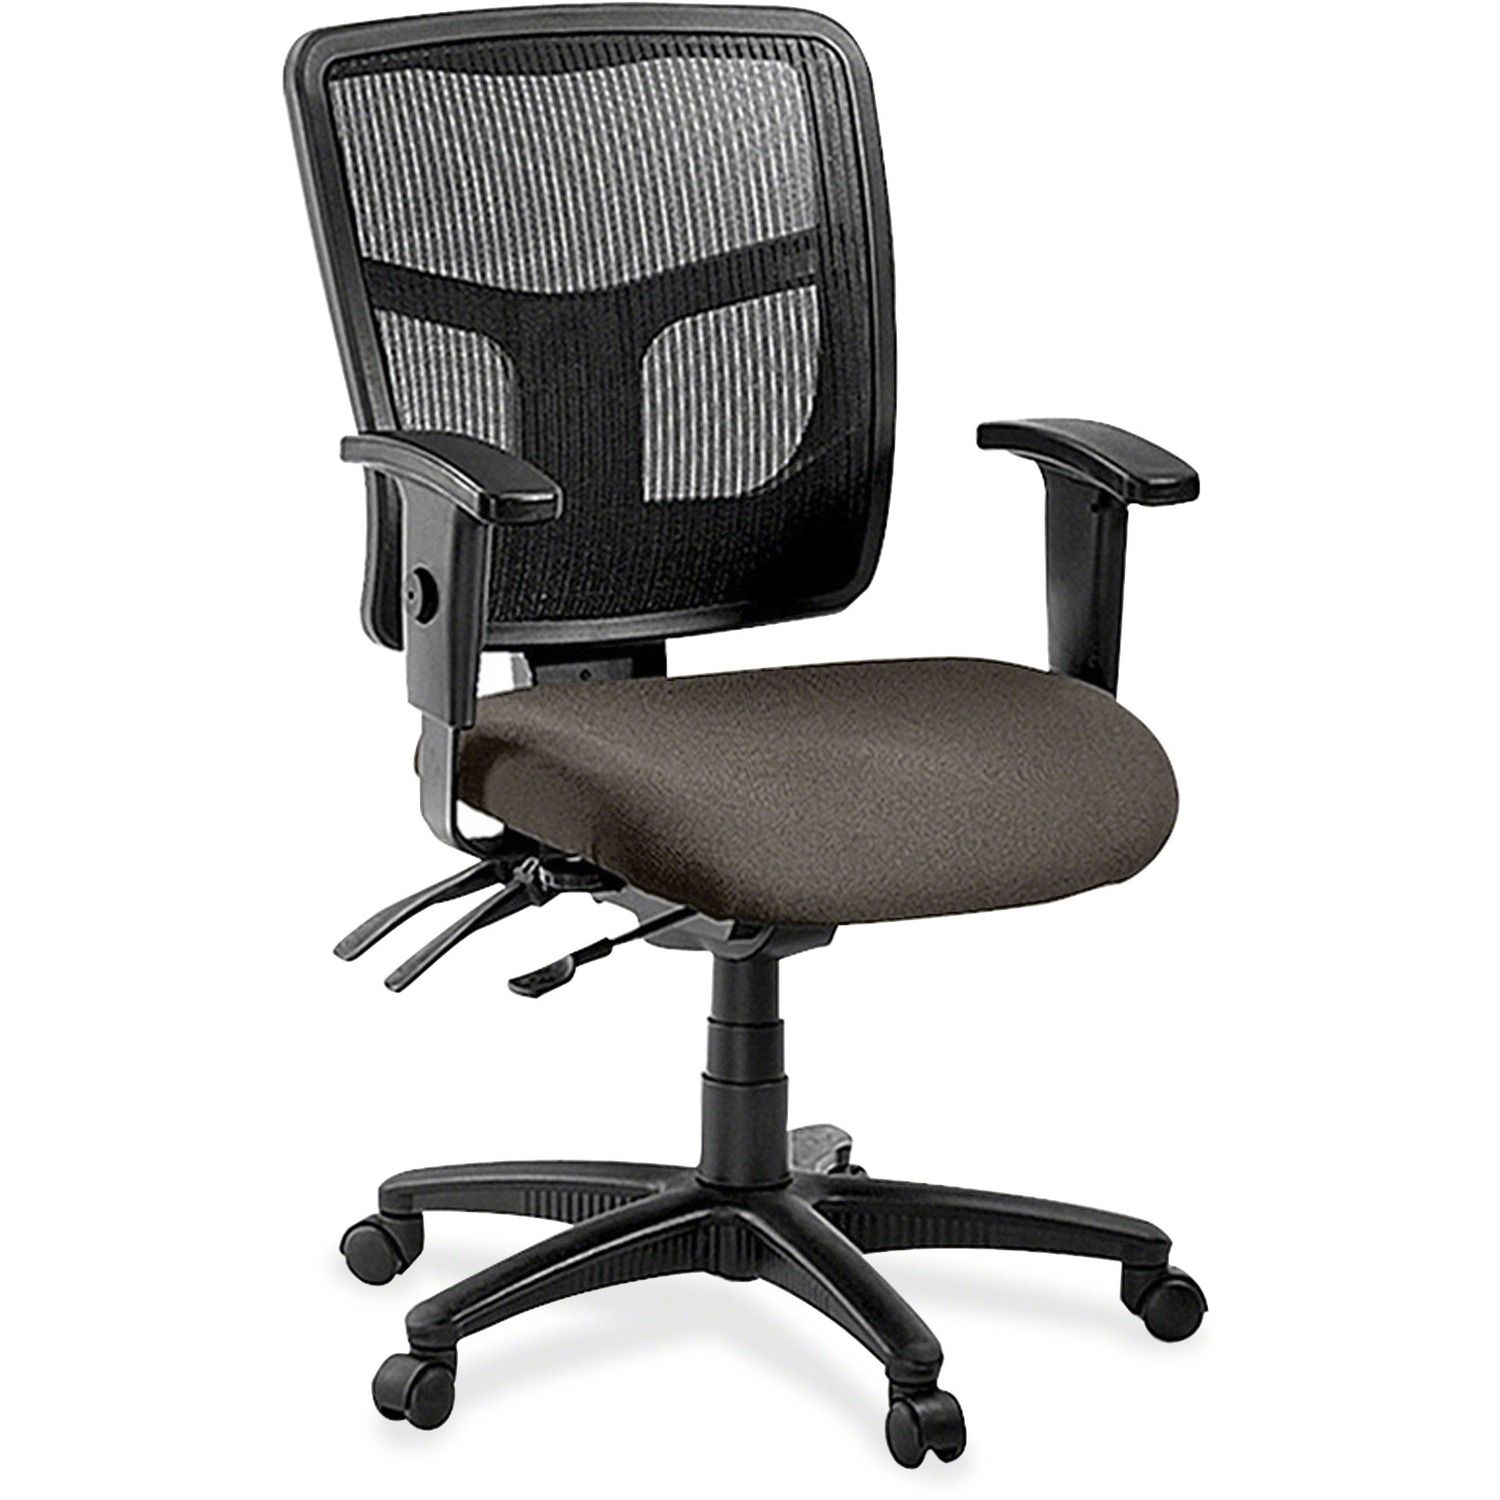 ErgoMesh Series Managerial Mid-Back Chair Abstract Carbon Fabric Seat, Black Back, Black Frame, 5-star Base, Black, 1 Each